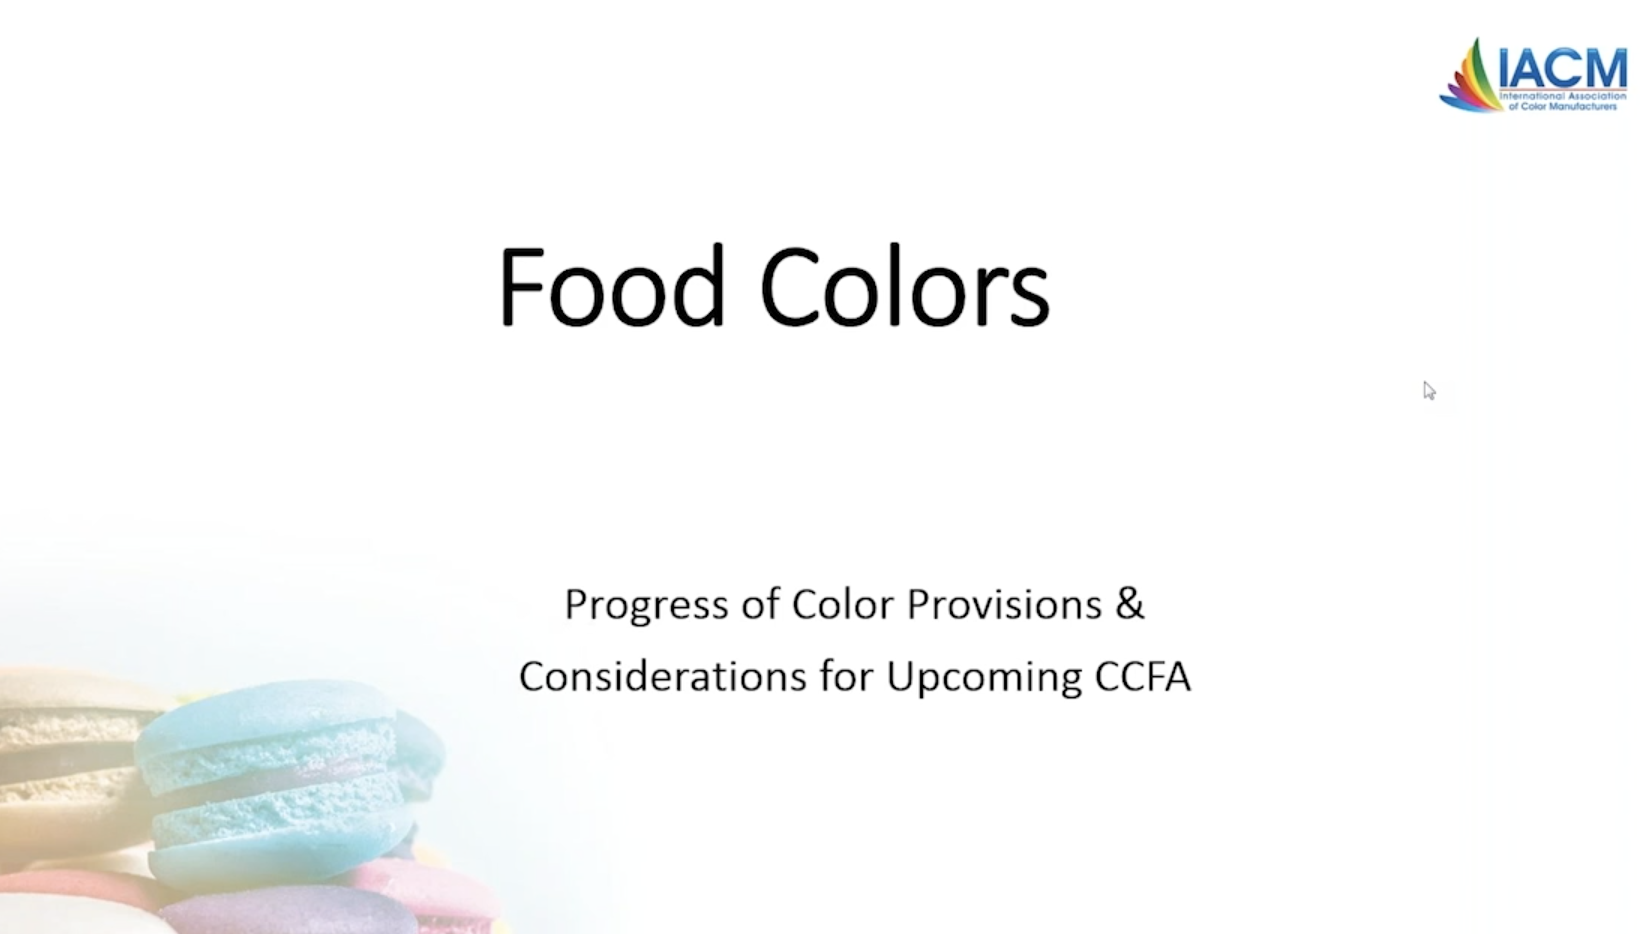 Food Colors Progress of Color Provisions & Considerations for Upcoming CCFA